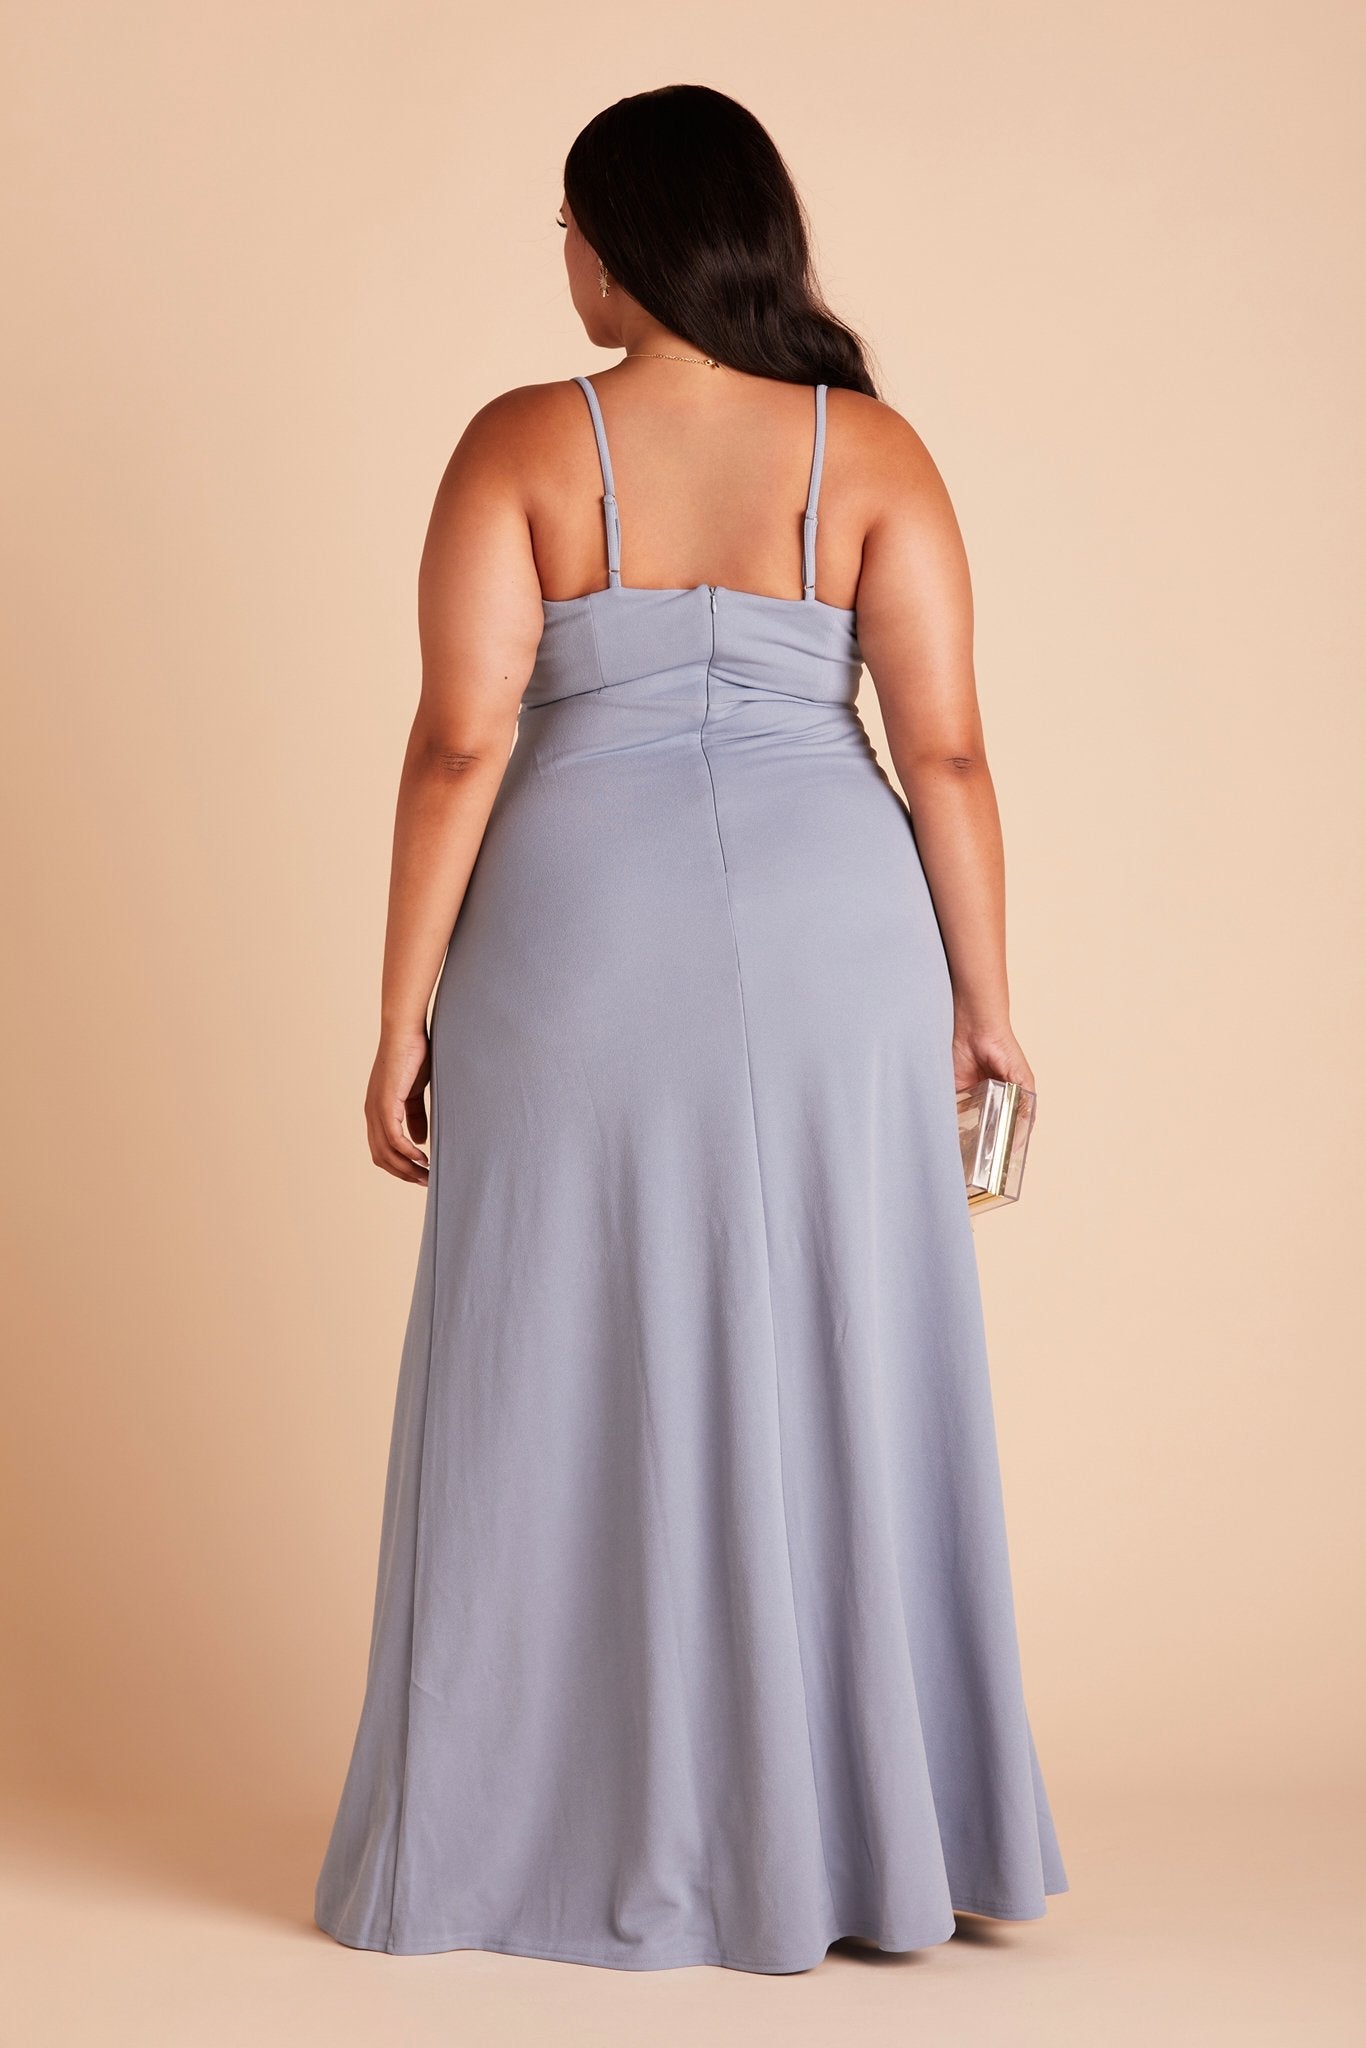 Back view of the Ash Plus Size Bridesmaid Dress  in dusty blue crepe shows skinny adjustable straps as well as an open back just below shoulder blades.